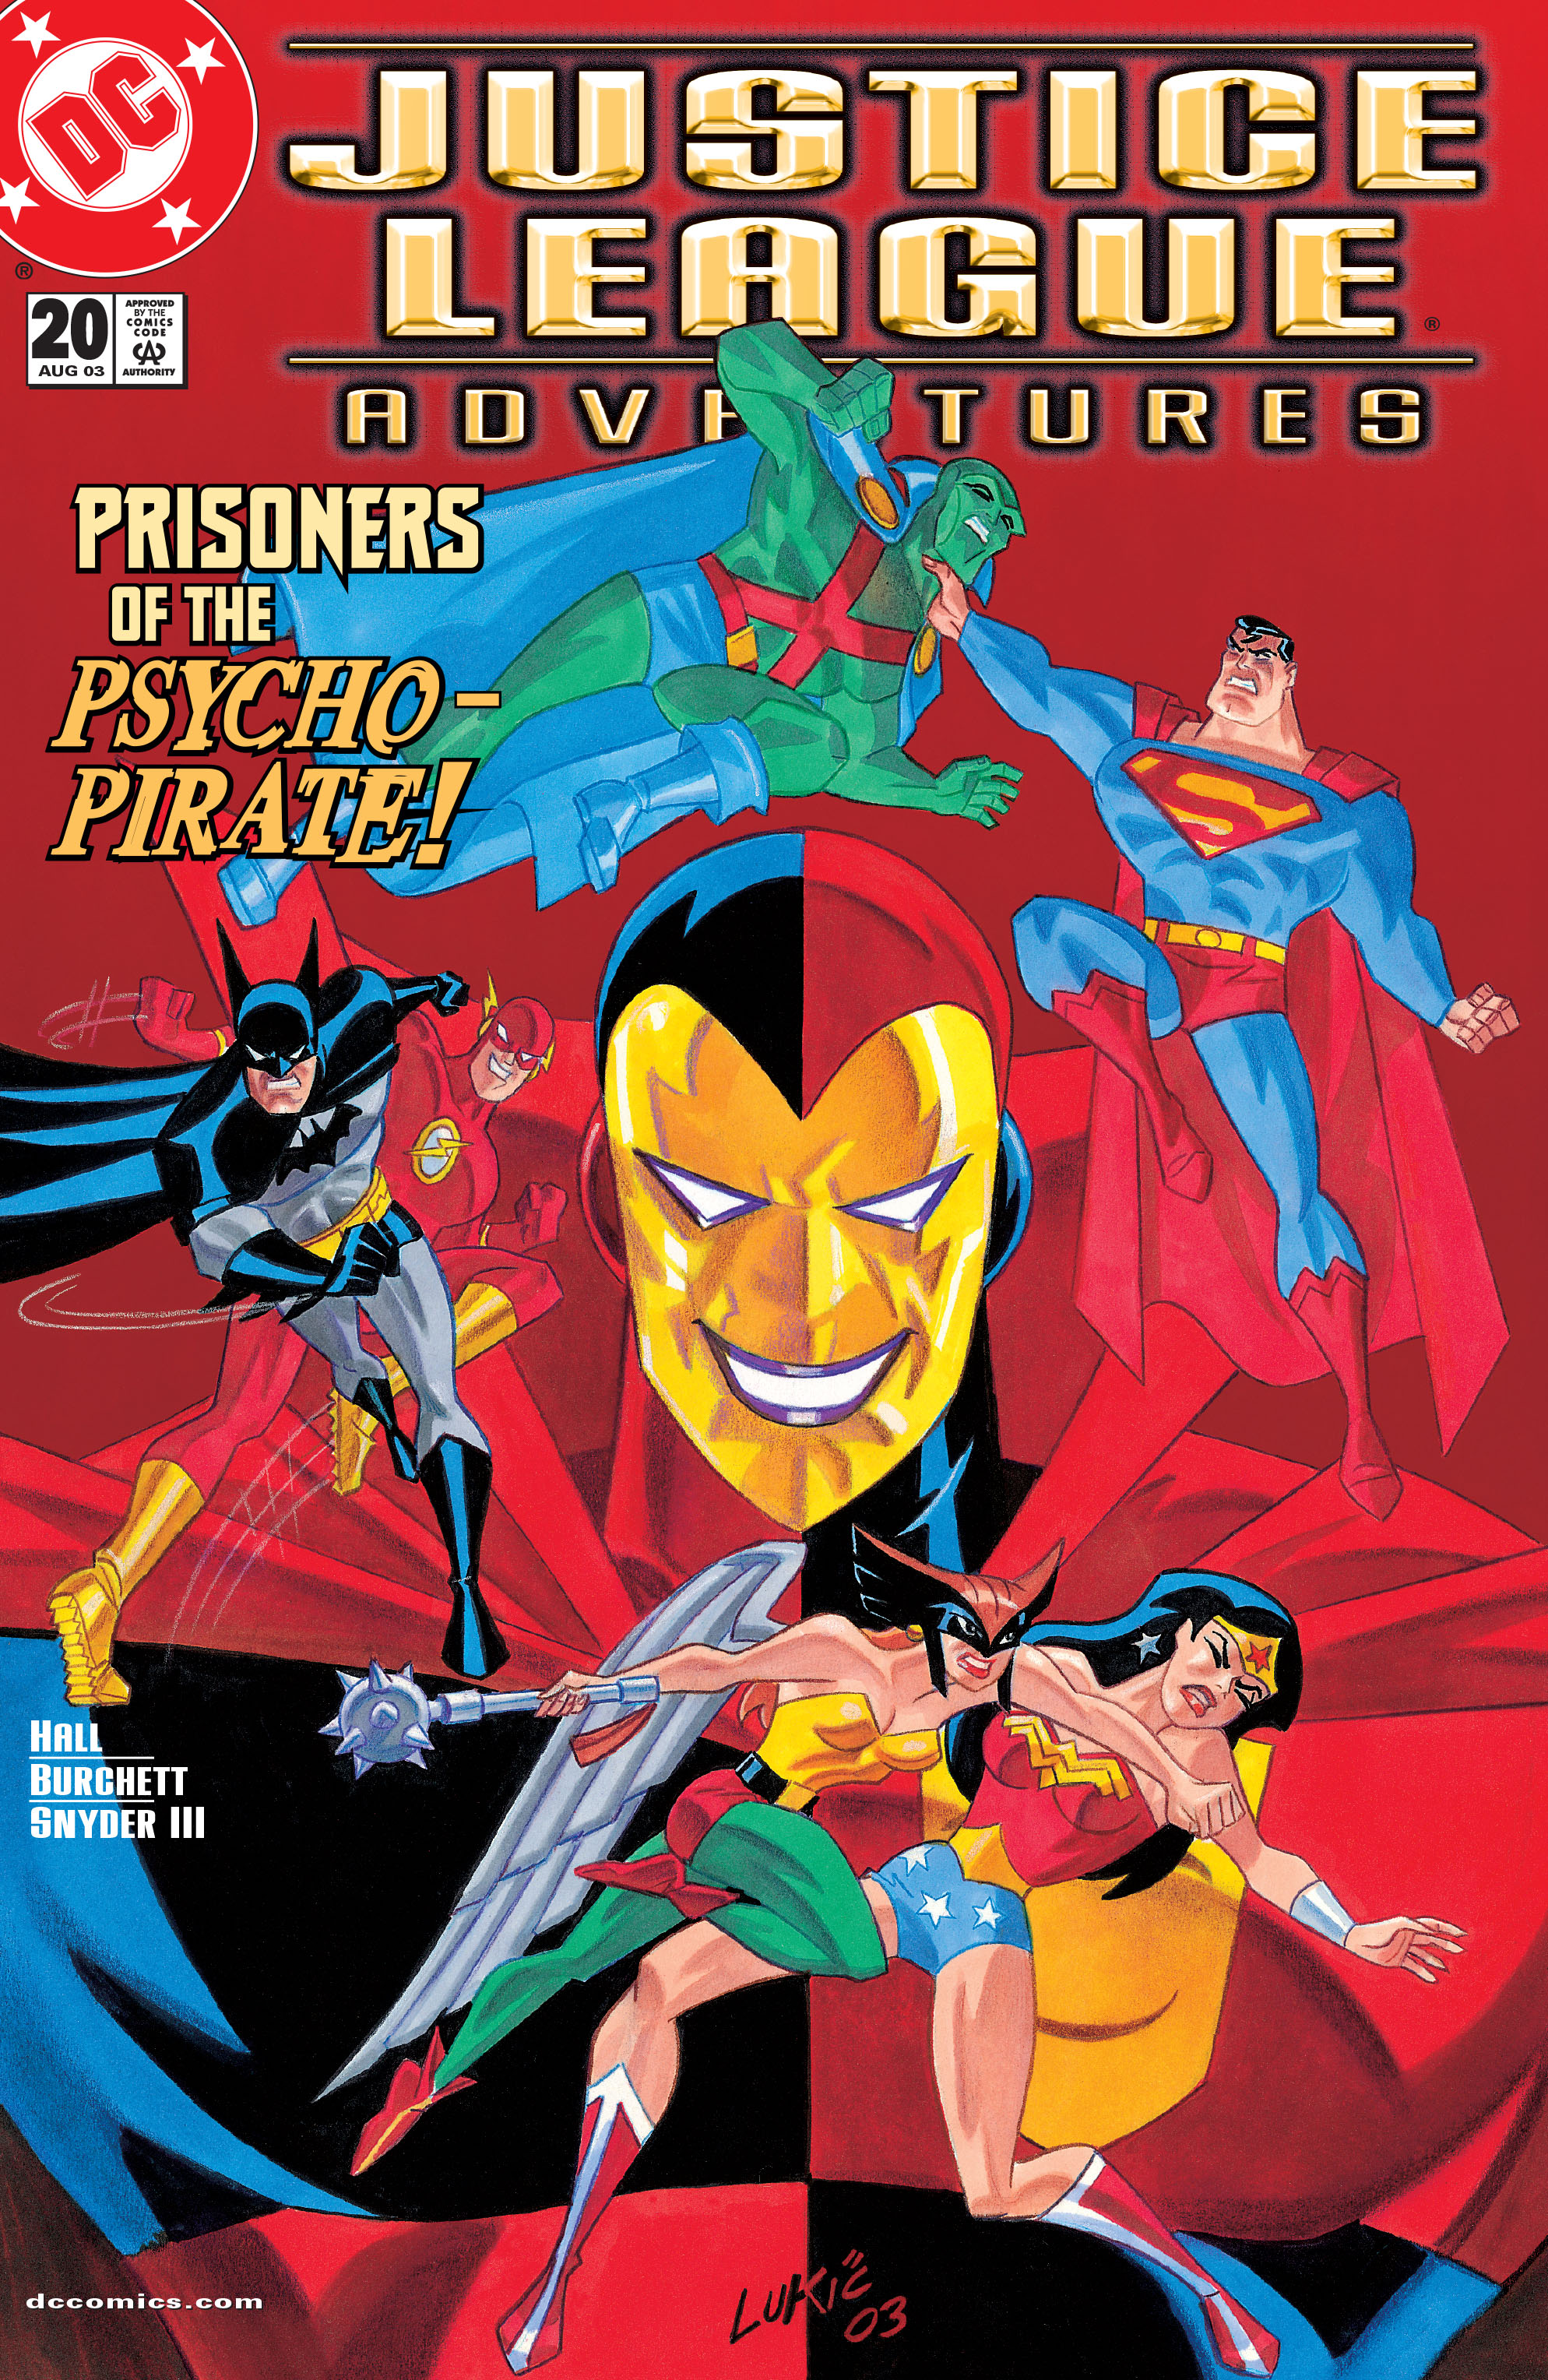 Read online Justice League Adventures comic -  Issue #20 - 1